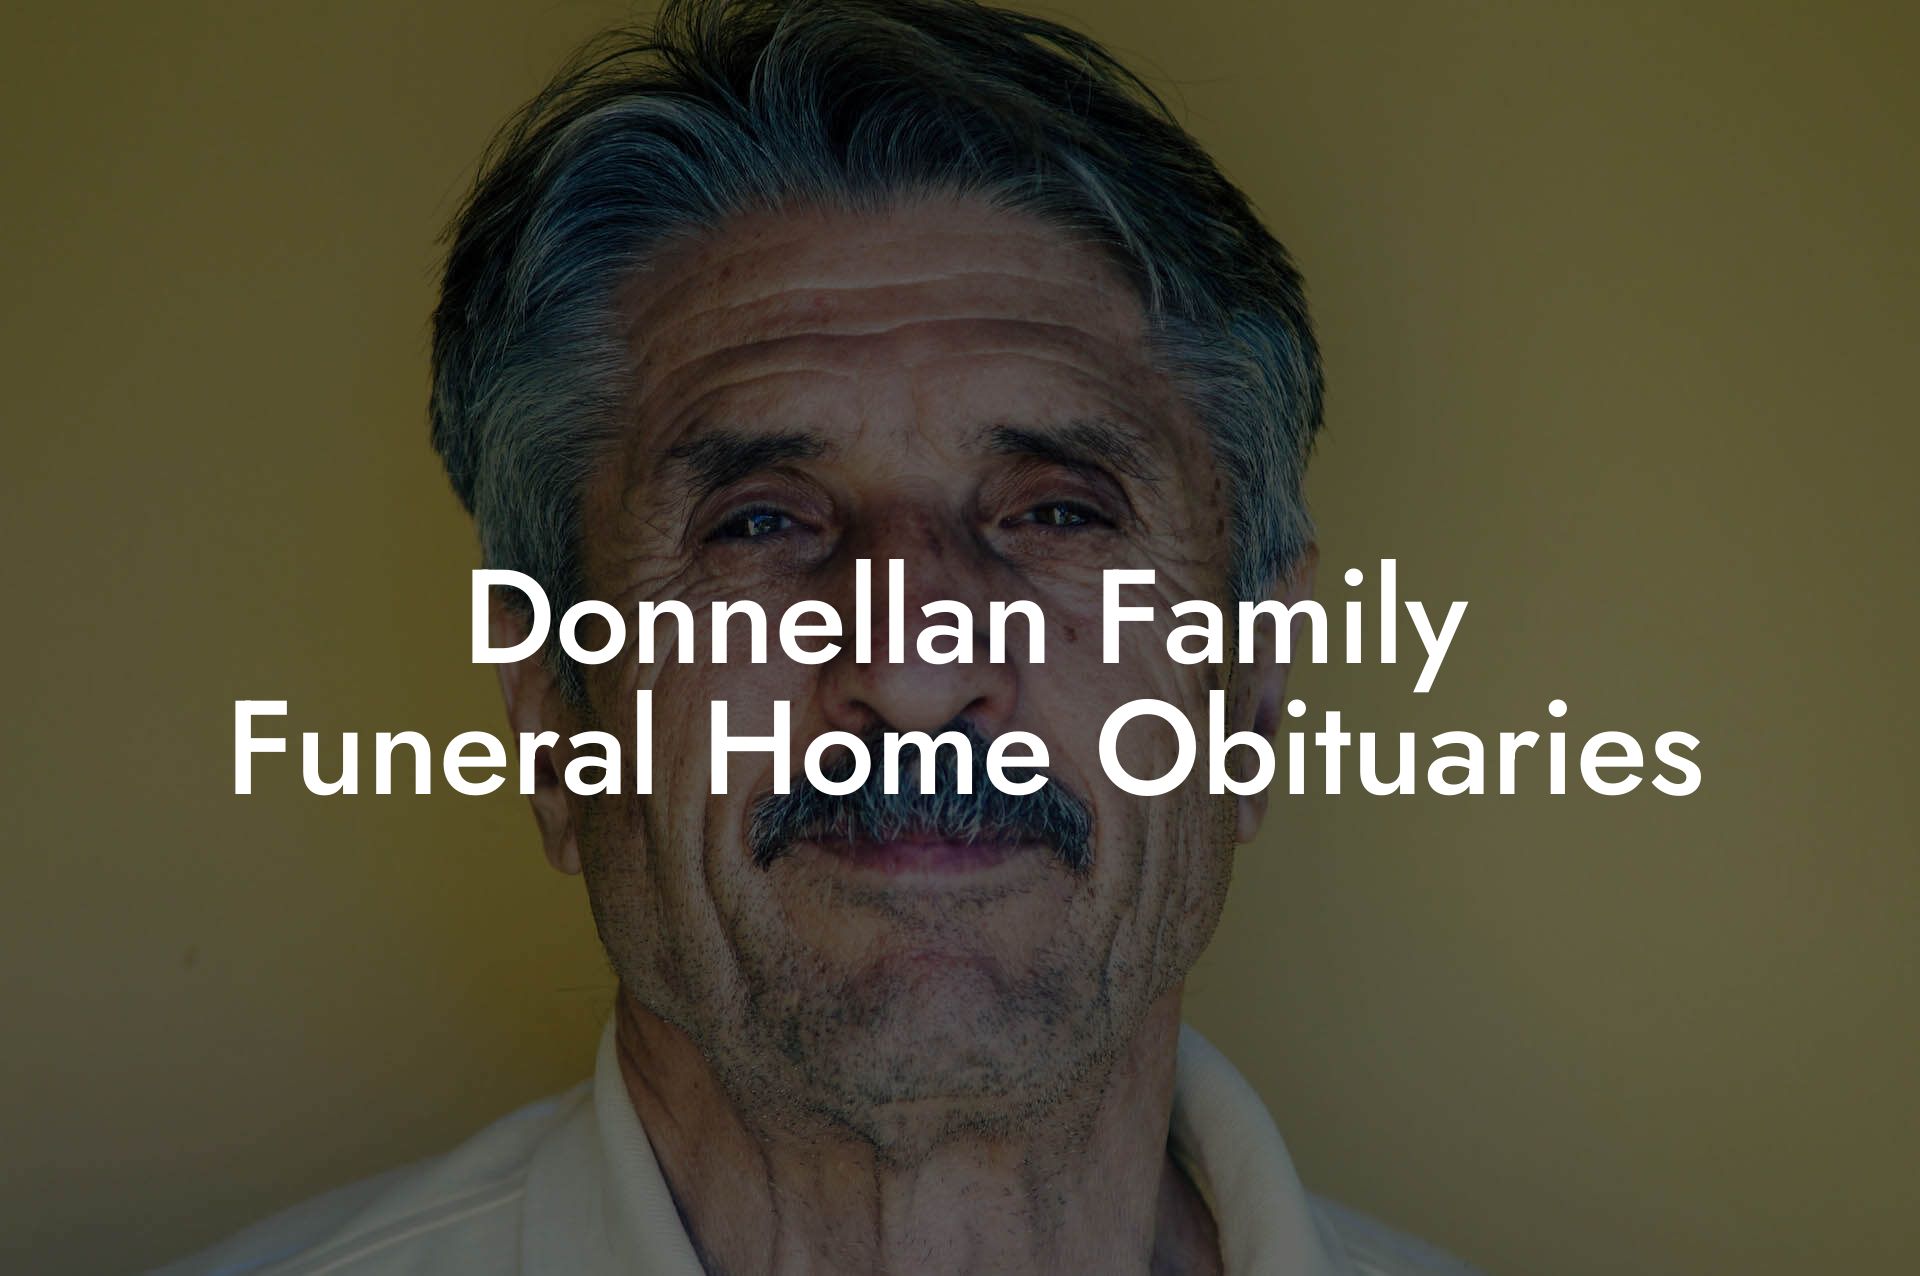 Donnellan Family Funeral Home Obituaries